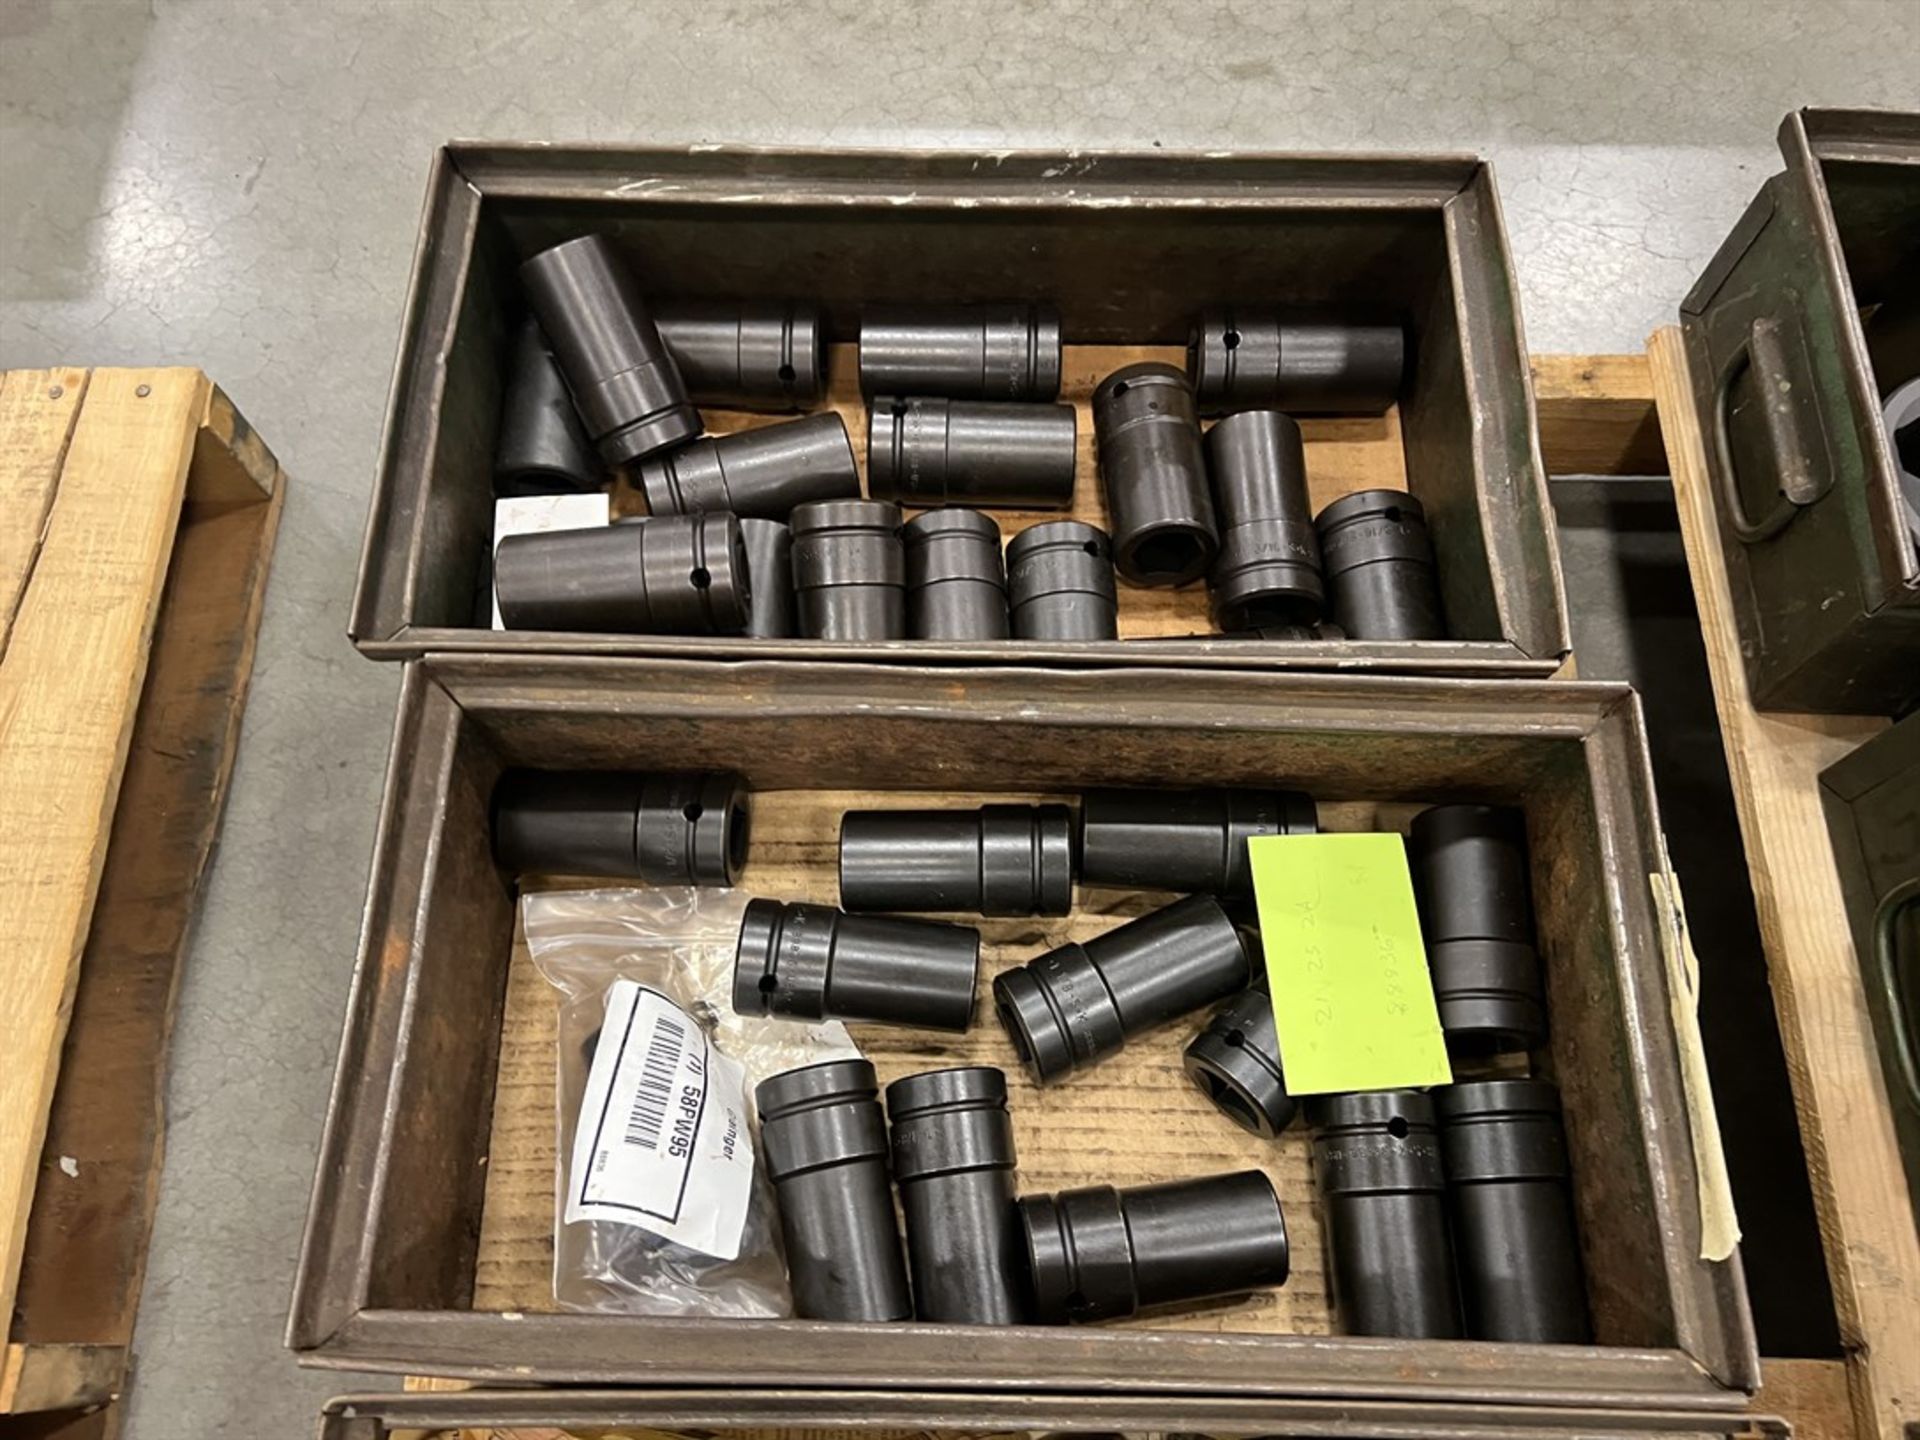 Pallet of 1" Drive Impact Sockets from 1-1/8" to 3-3/8" - Image 4 of 5